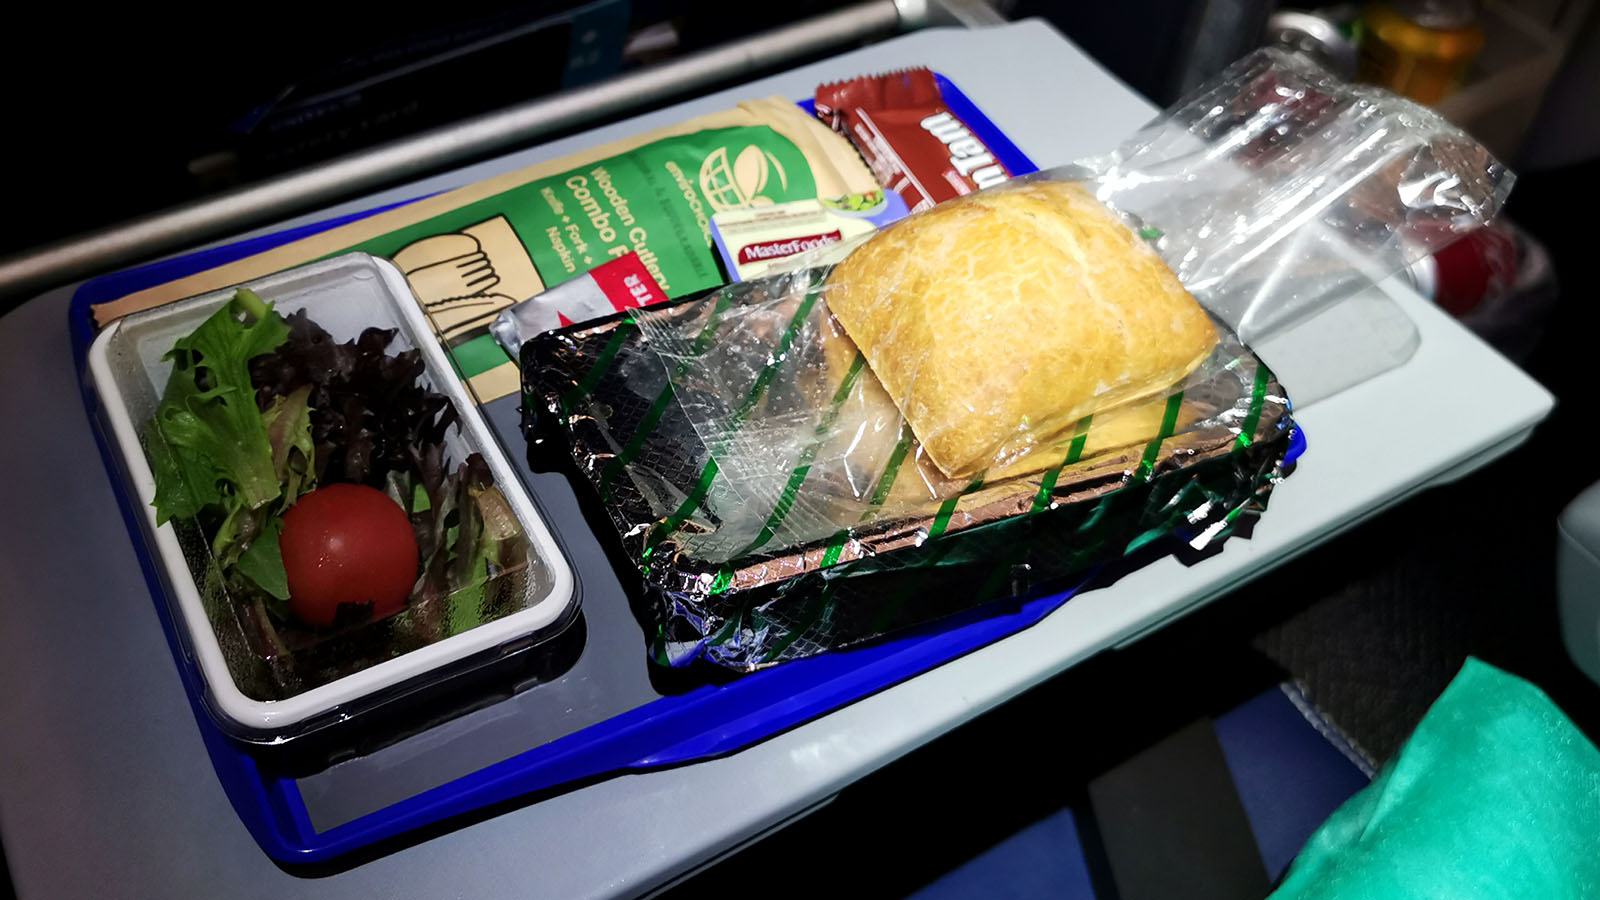 Meal as served in United Airlines Boeing 787 Economy